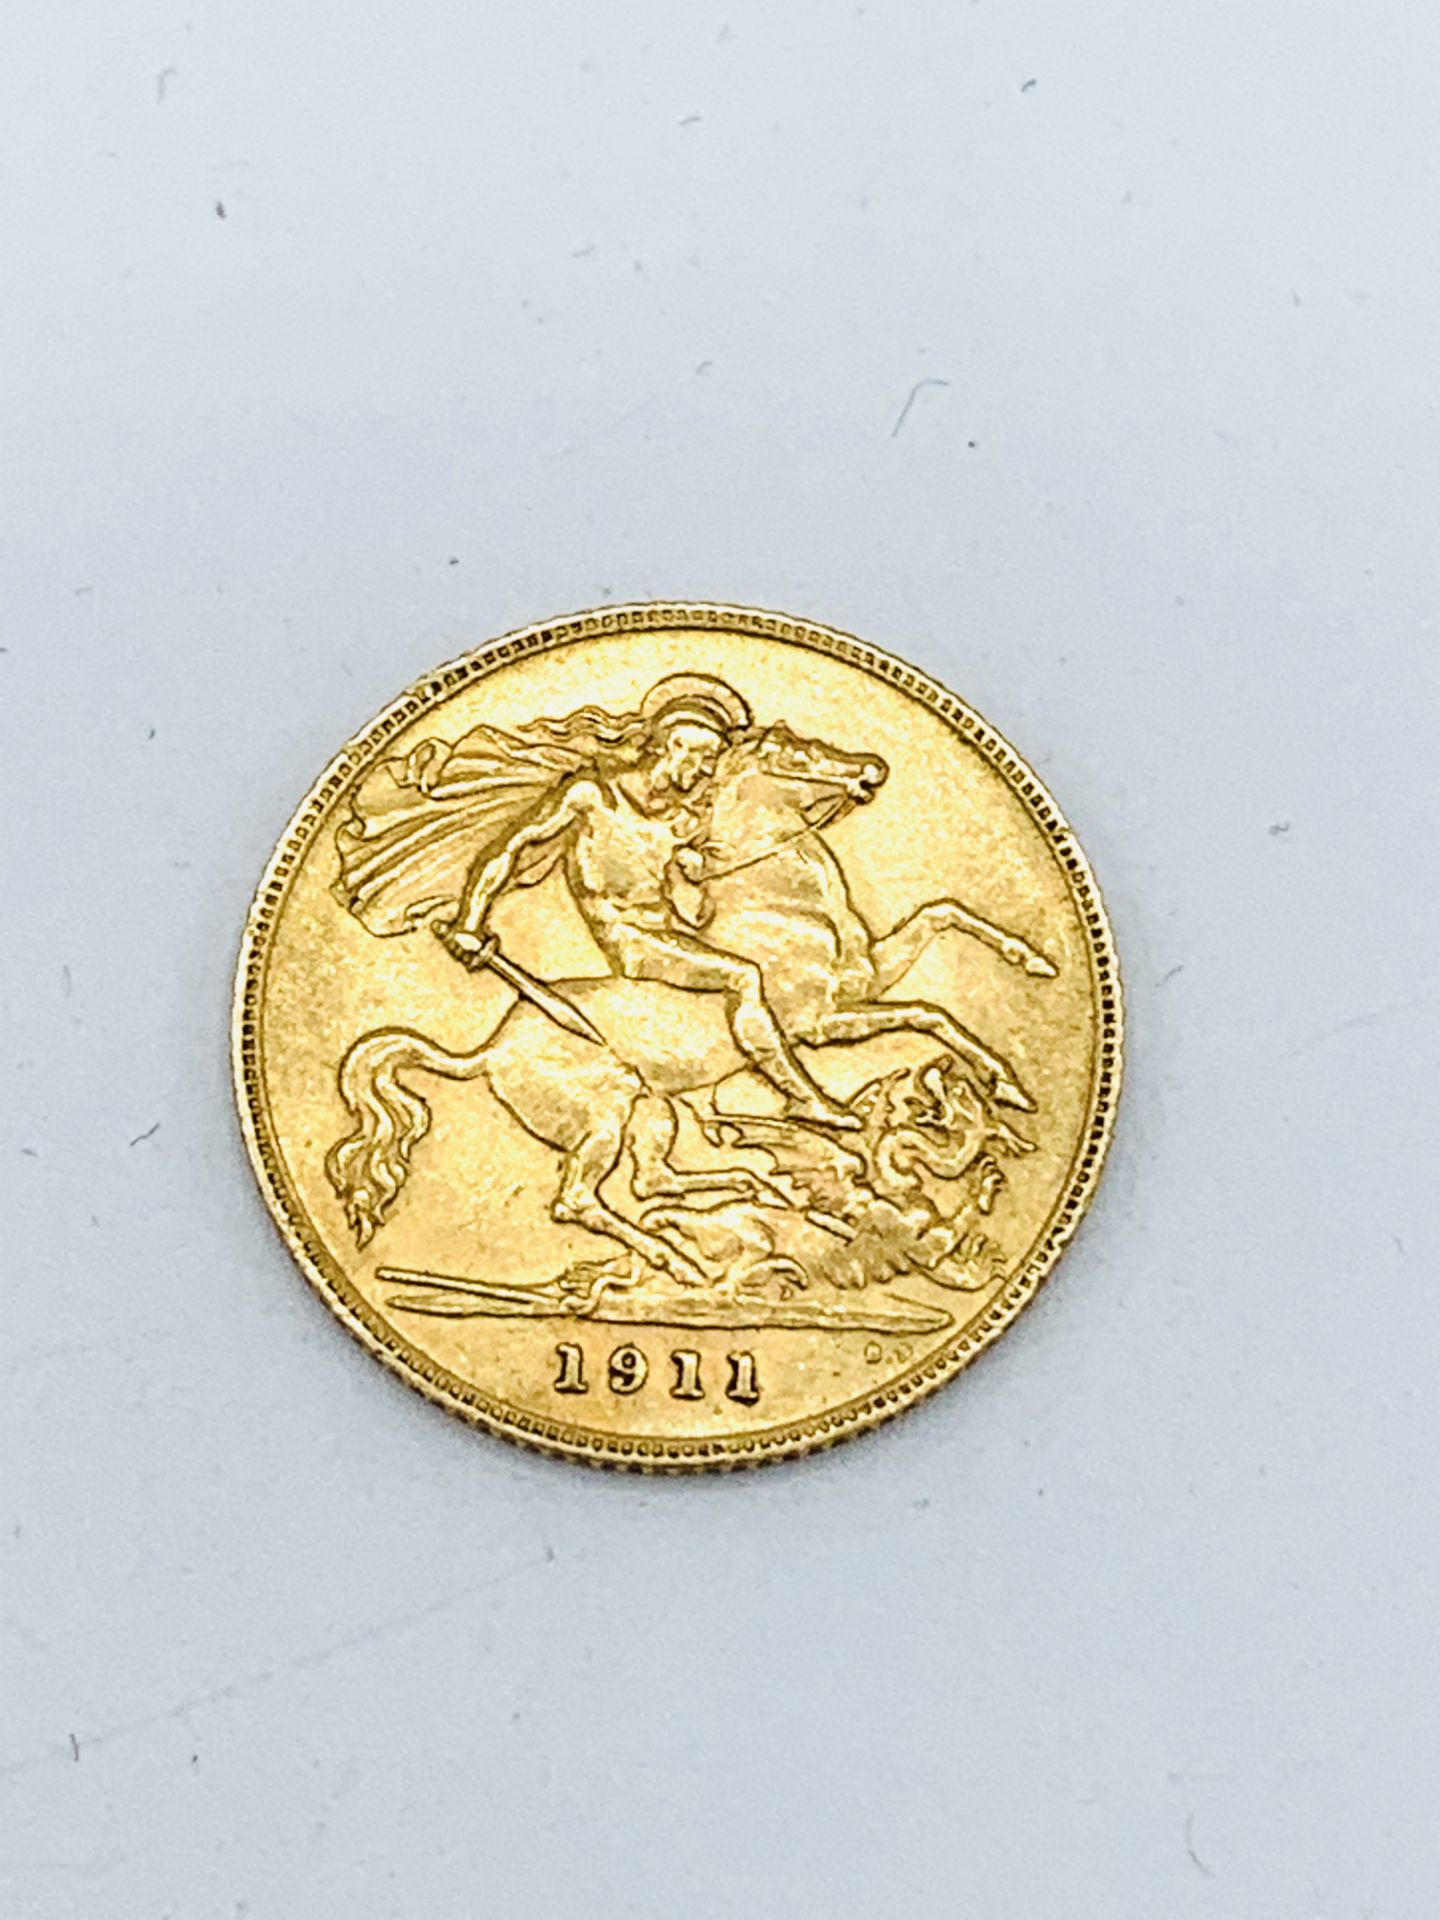 1911 gold half sovereign - Image 2 of 2